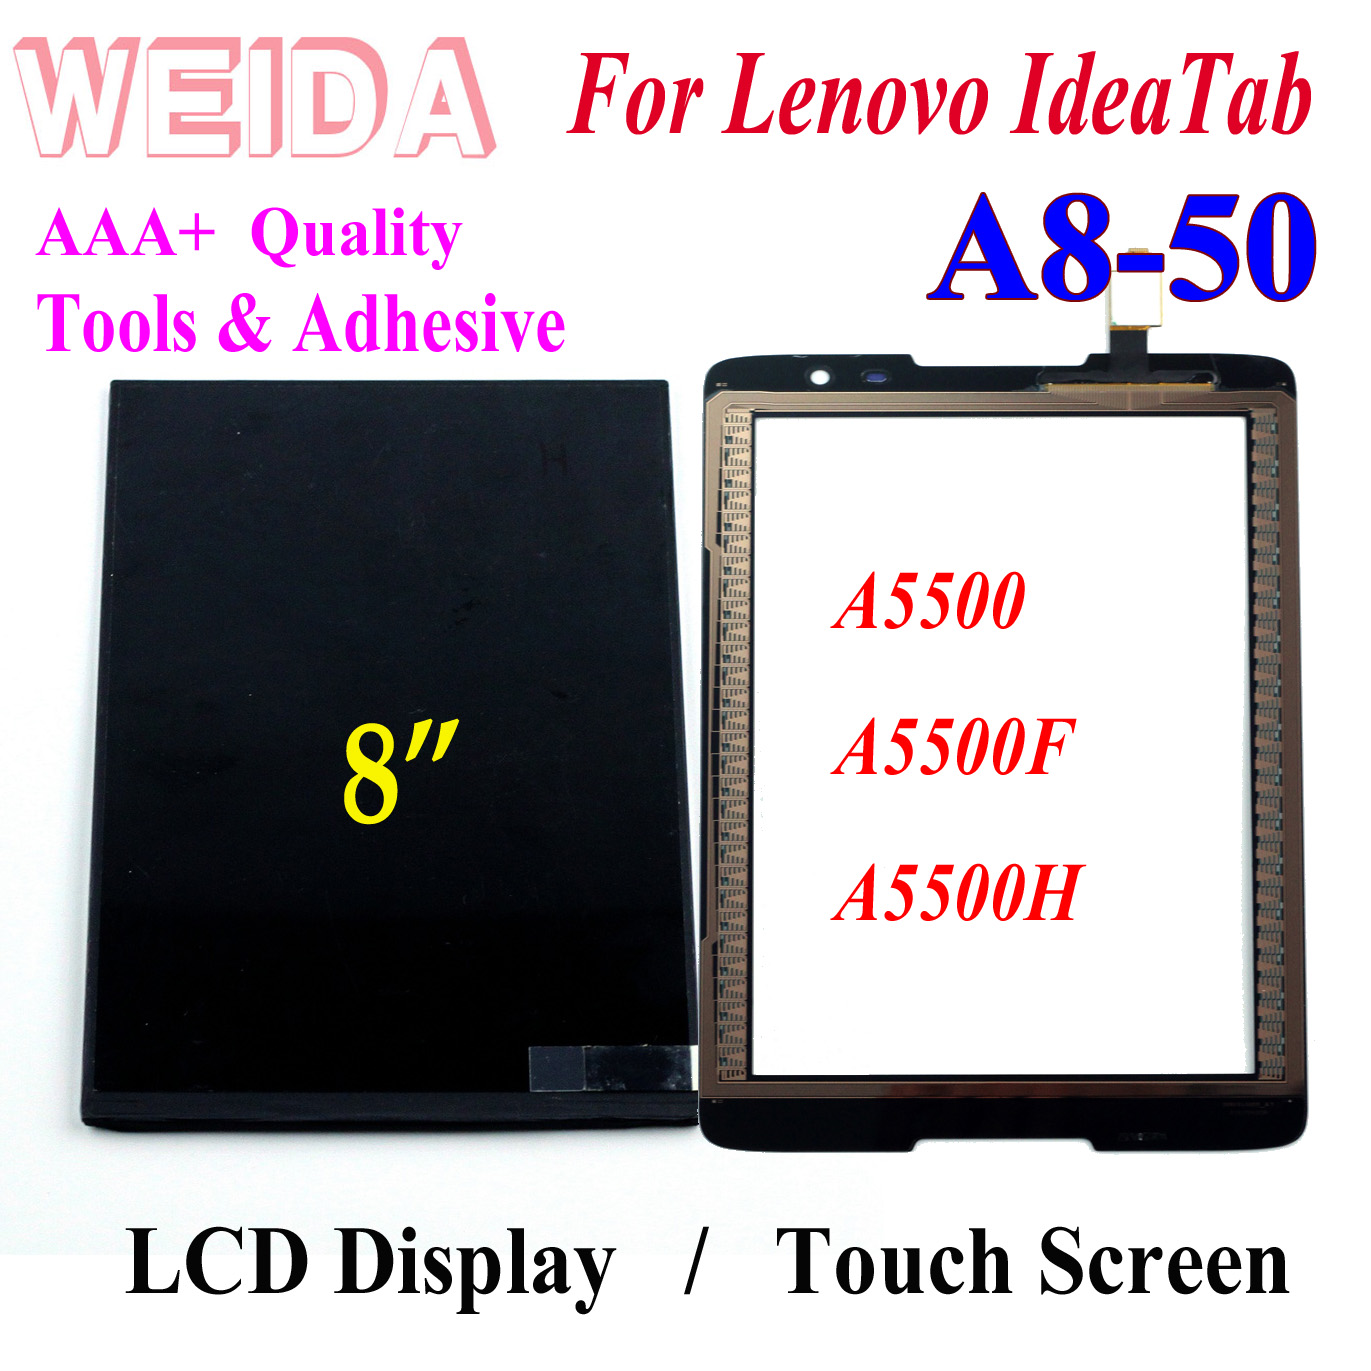 WEIDA LCD Vervanging 8 "Voor Lenovo IdeaTab A8-50 A5500 A5500F Tablet PC Lcd Touch Screen Afzonderlijk A5500-H